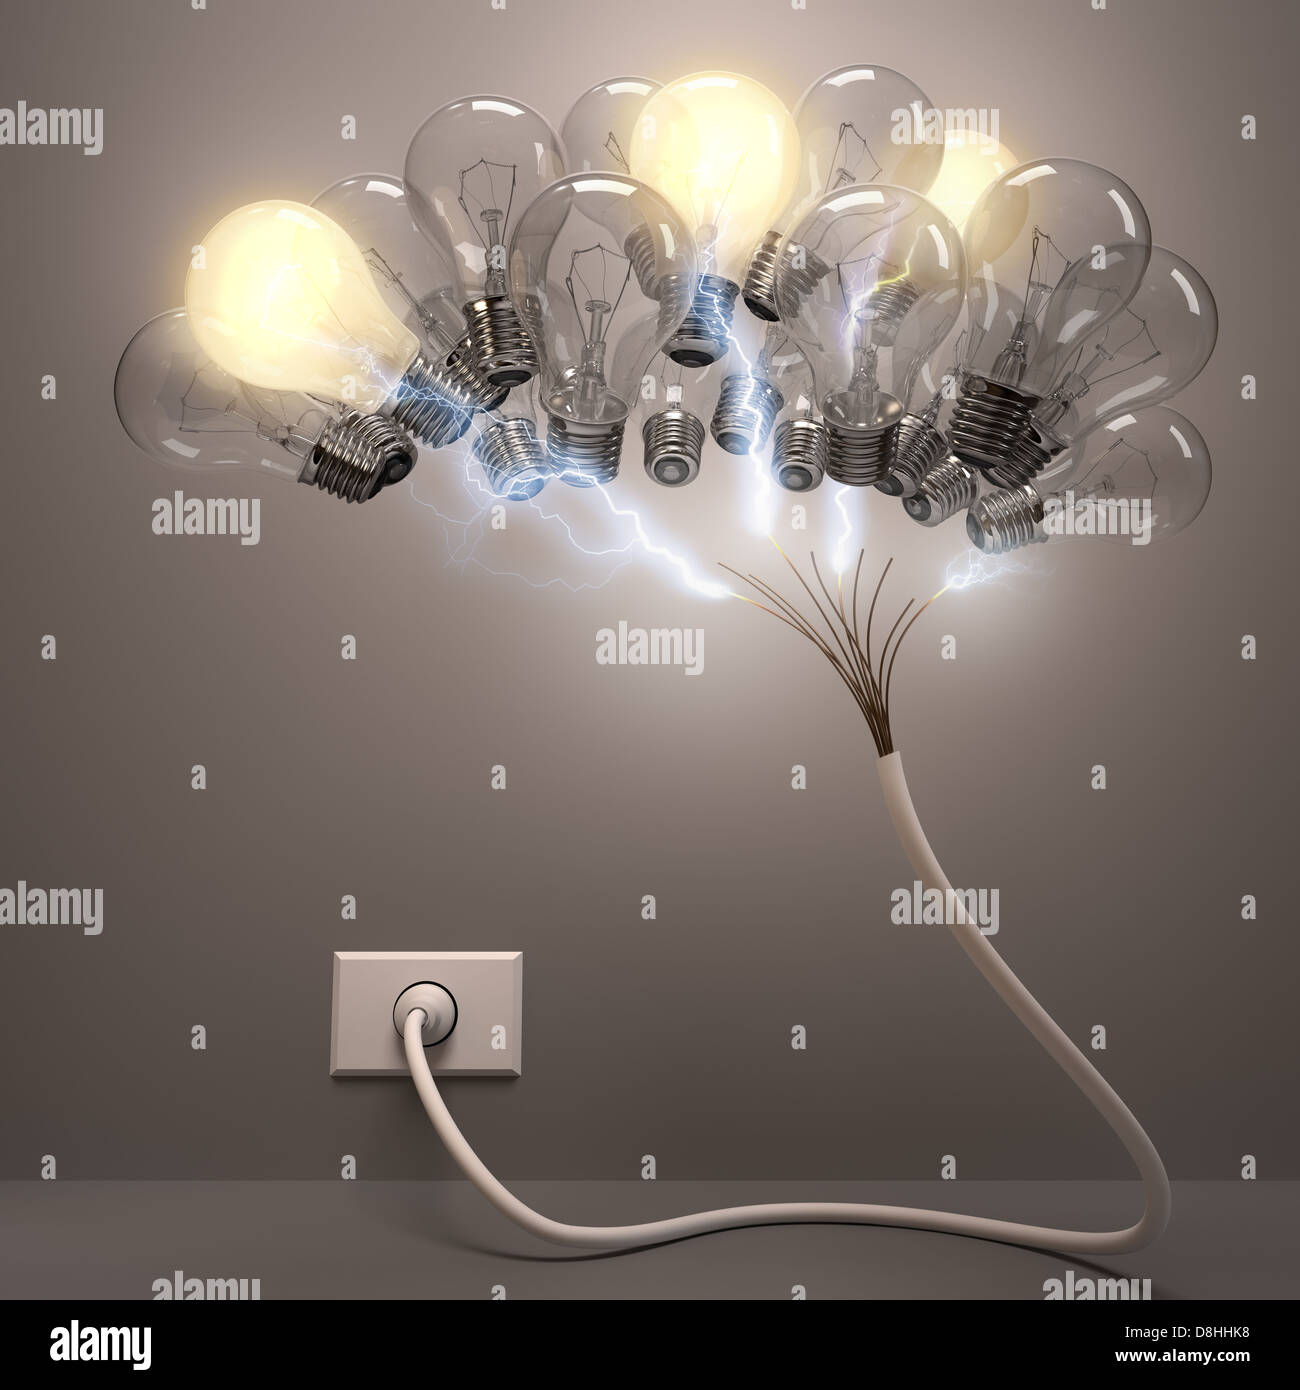 Grouped lamps shaped brain. Some lamps lighting, concept of active neurons. Stock Photo